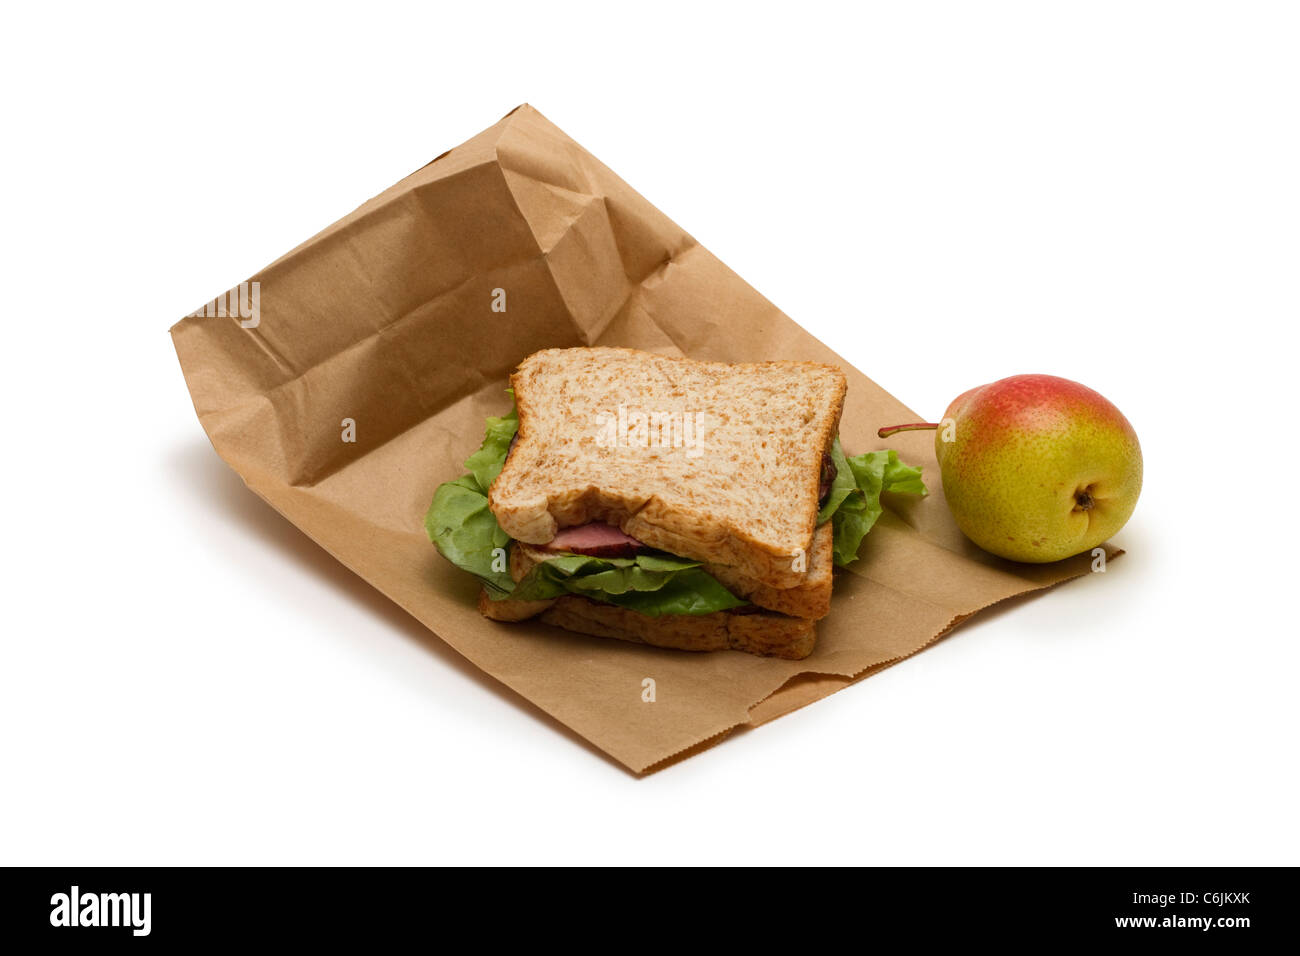 healthy brown bag lunch